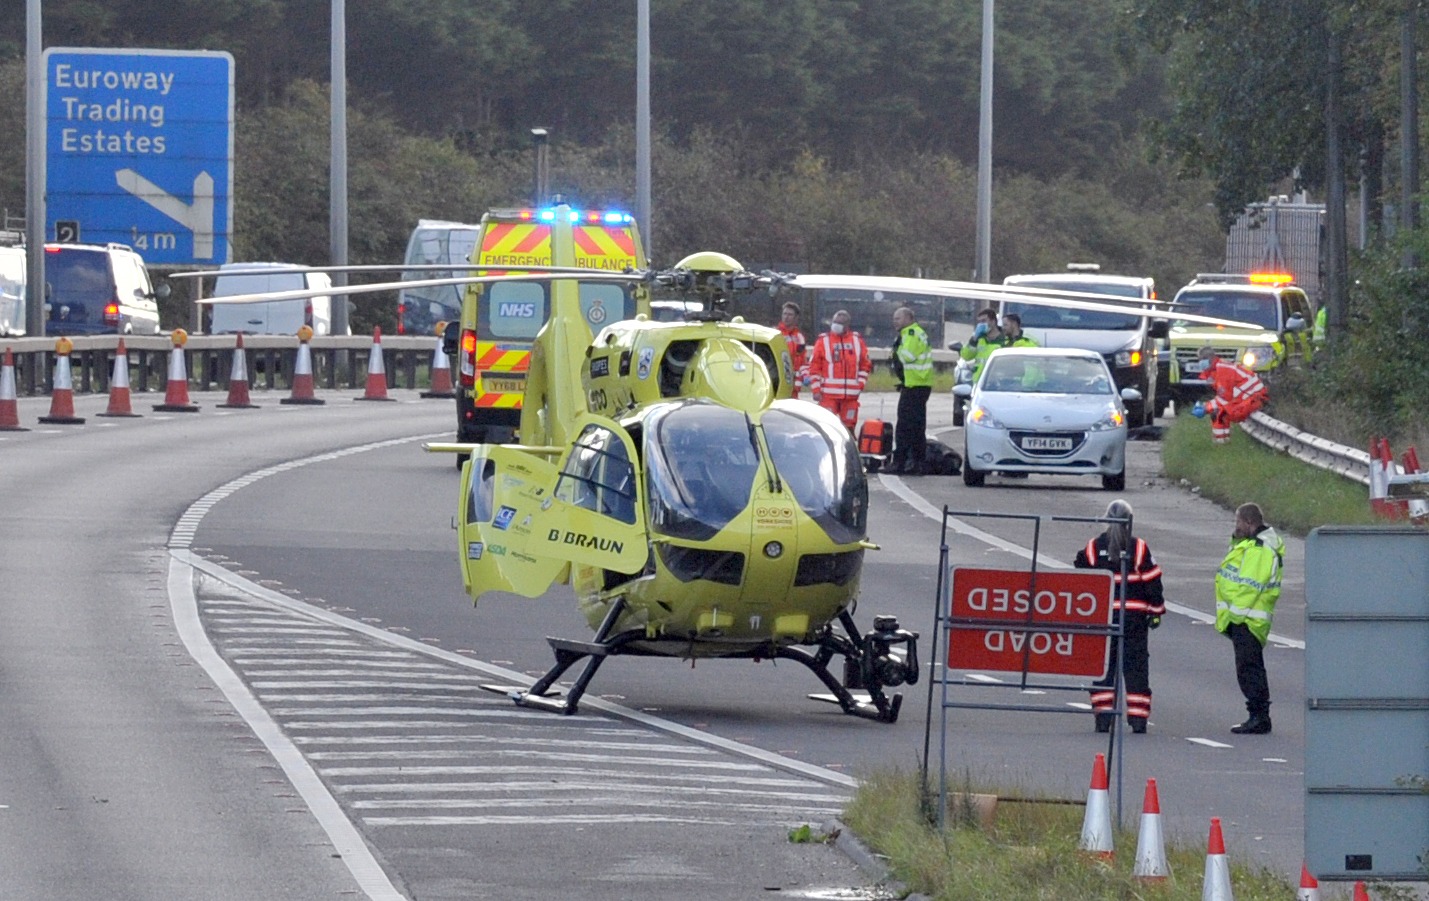 Air ambulance lands on the M606 after crash | Bradford Telegraph and Argus